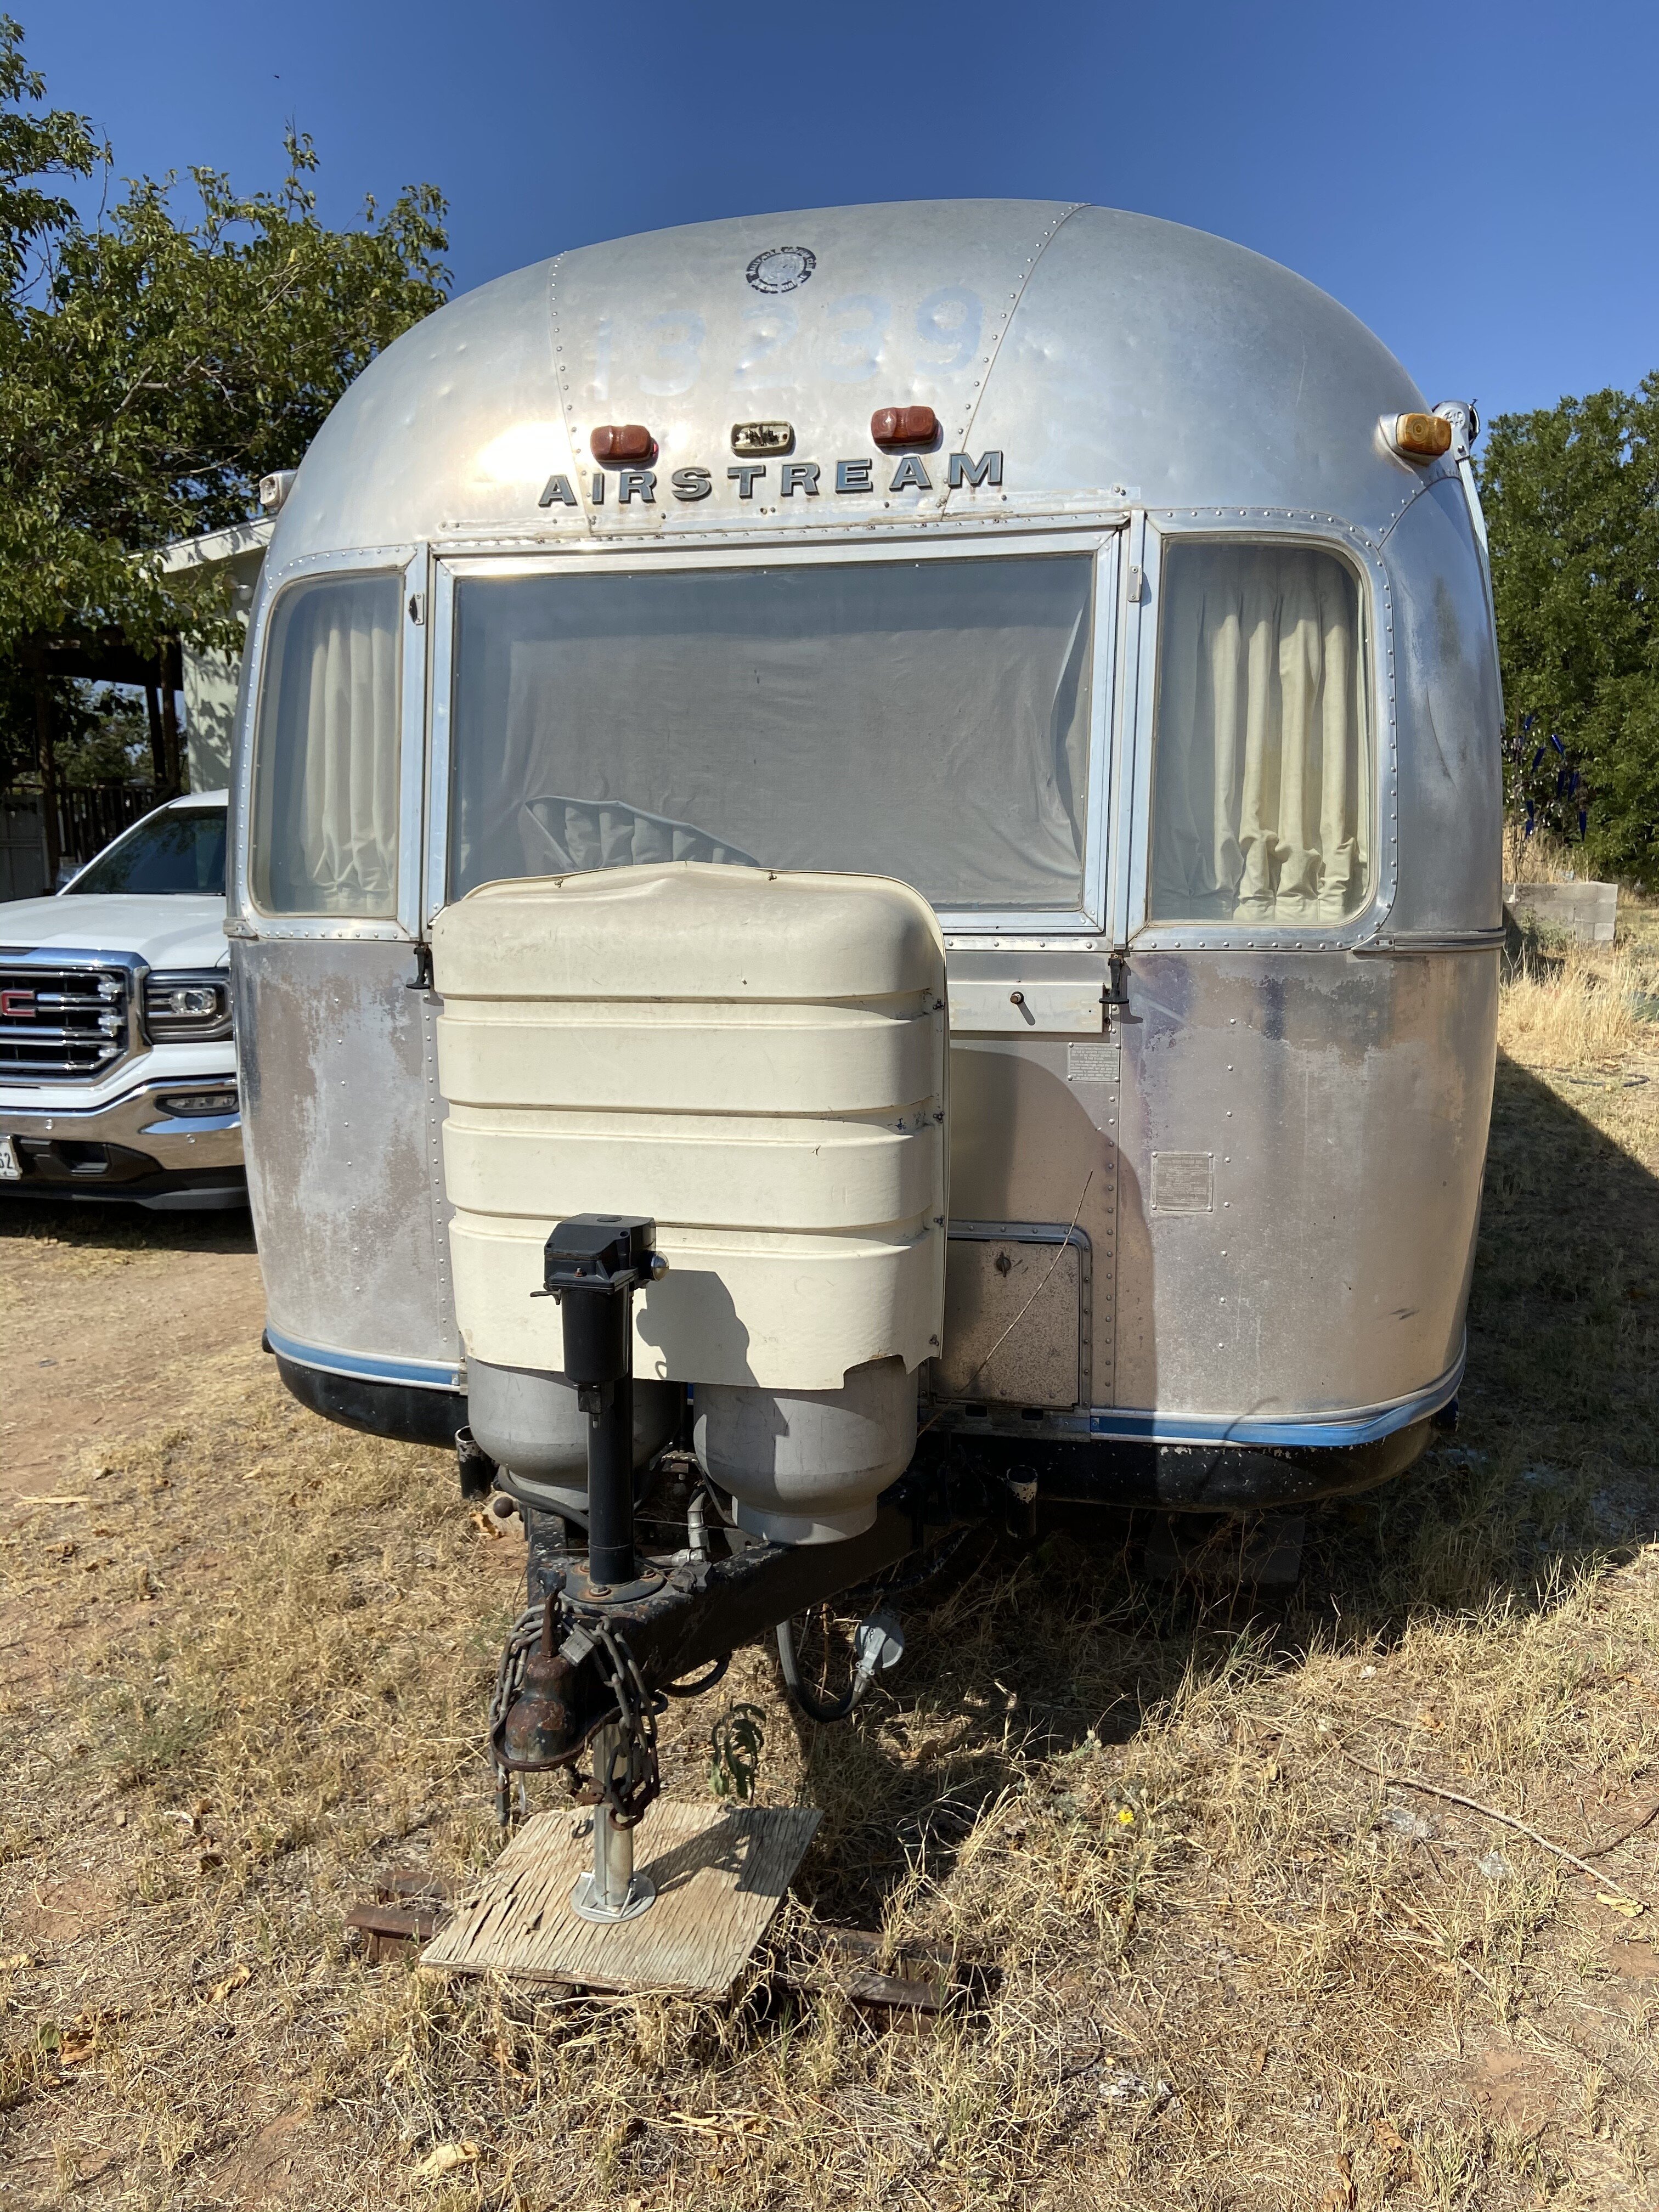 1979 Airstream Deluxe Land Yacht RVs for Sale - RVs on Autotrader